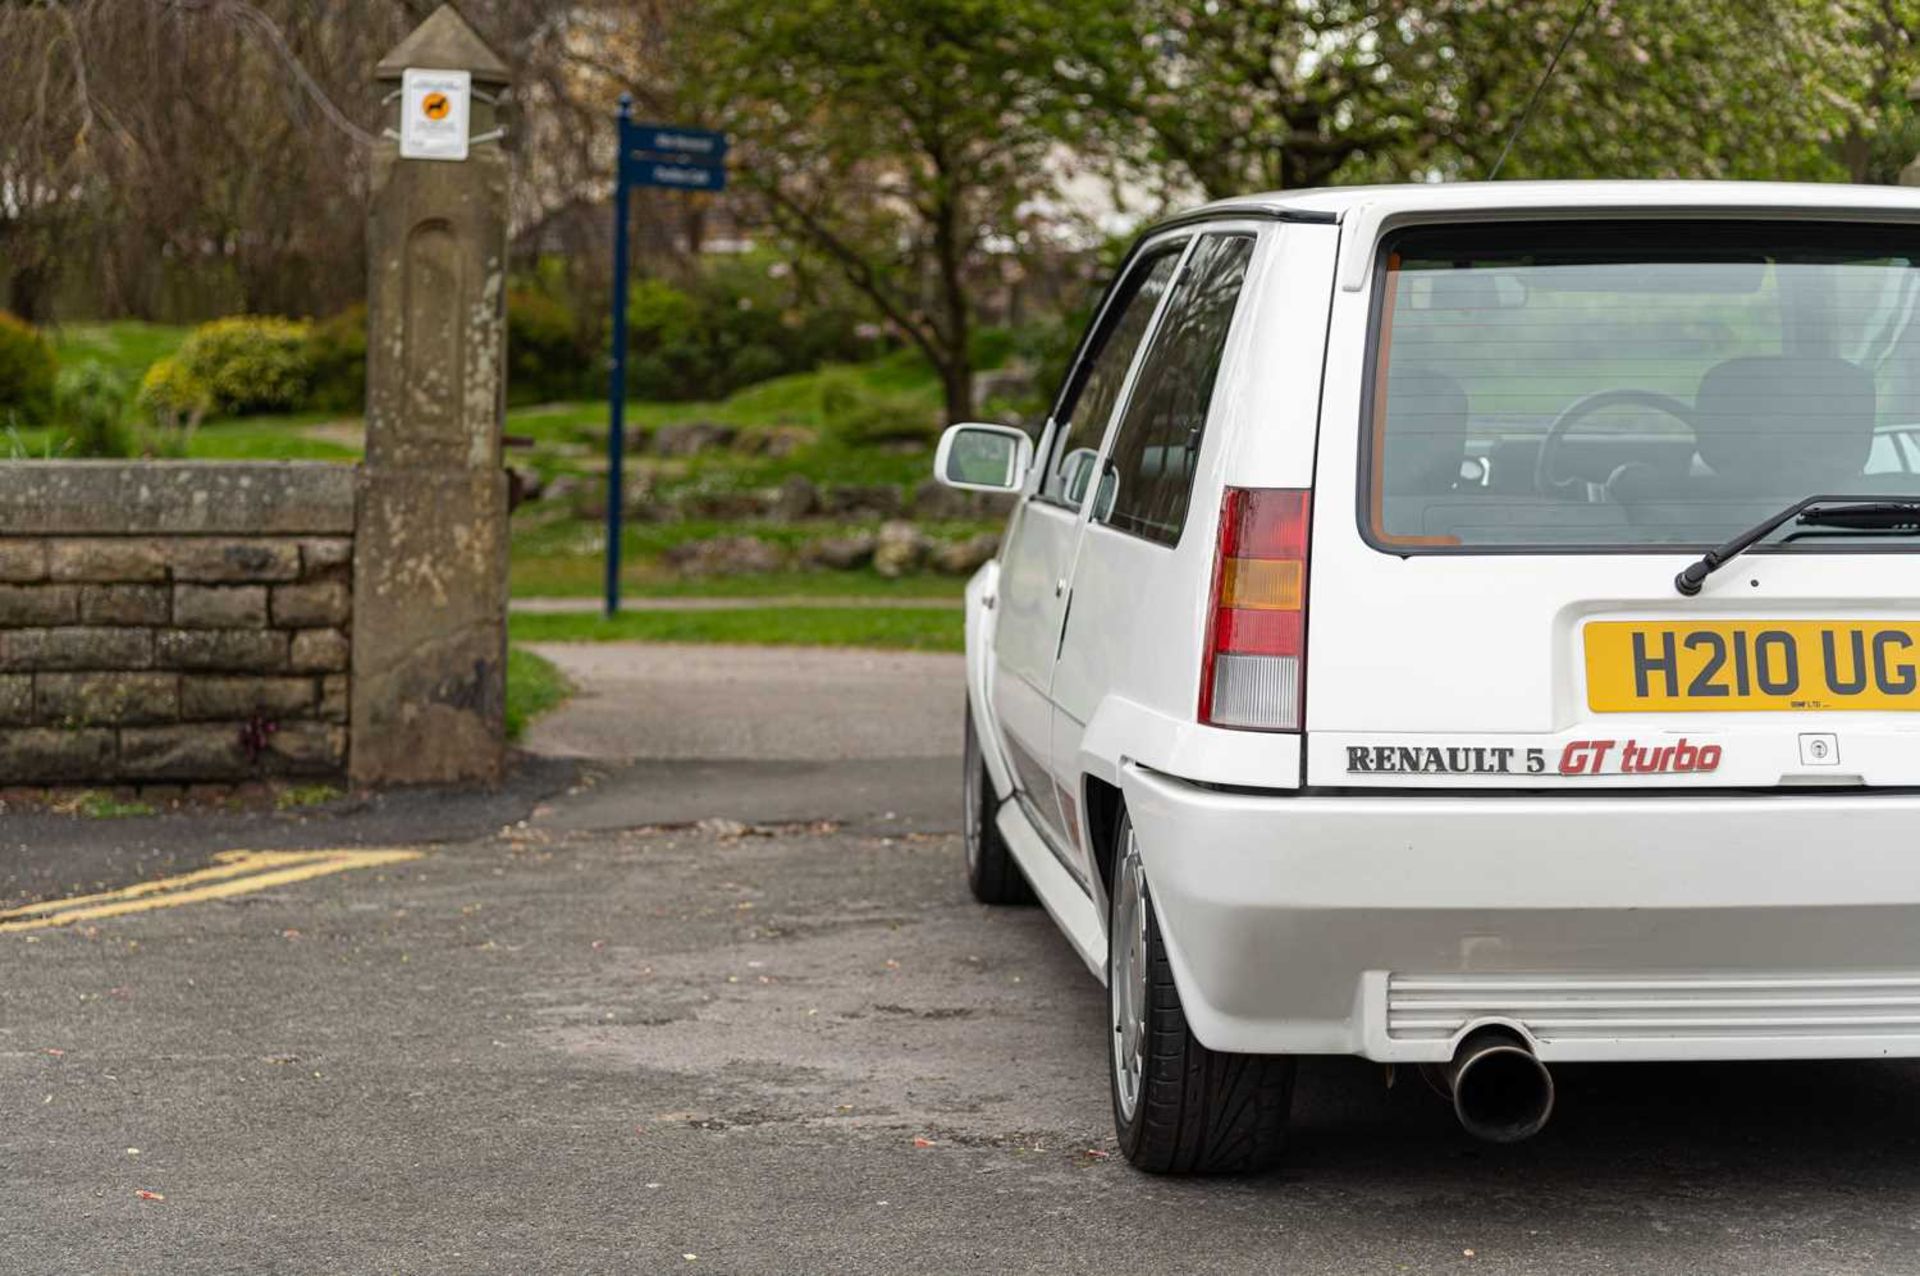 1990 Renault 5 GT Turbo - Image 8 of 79